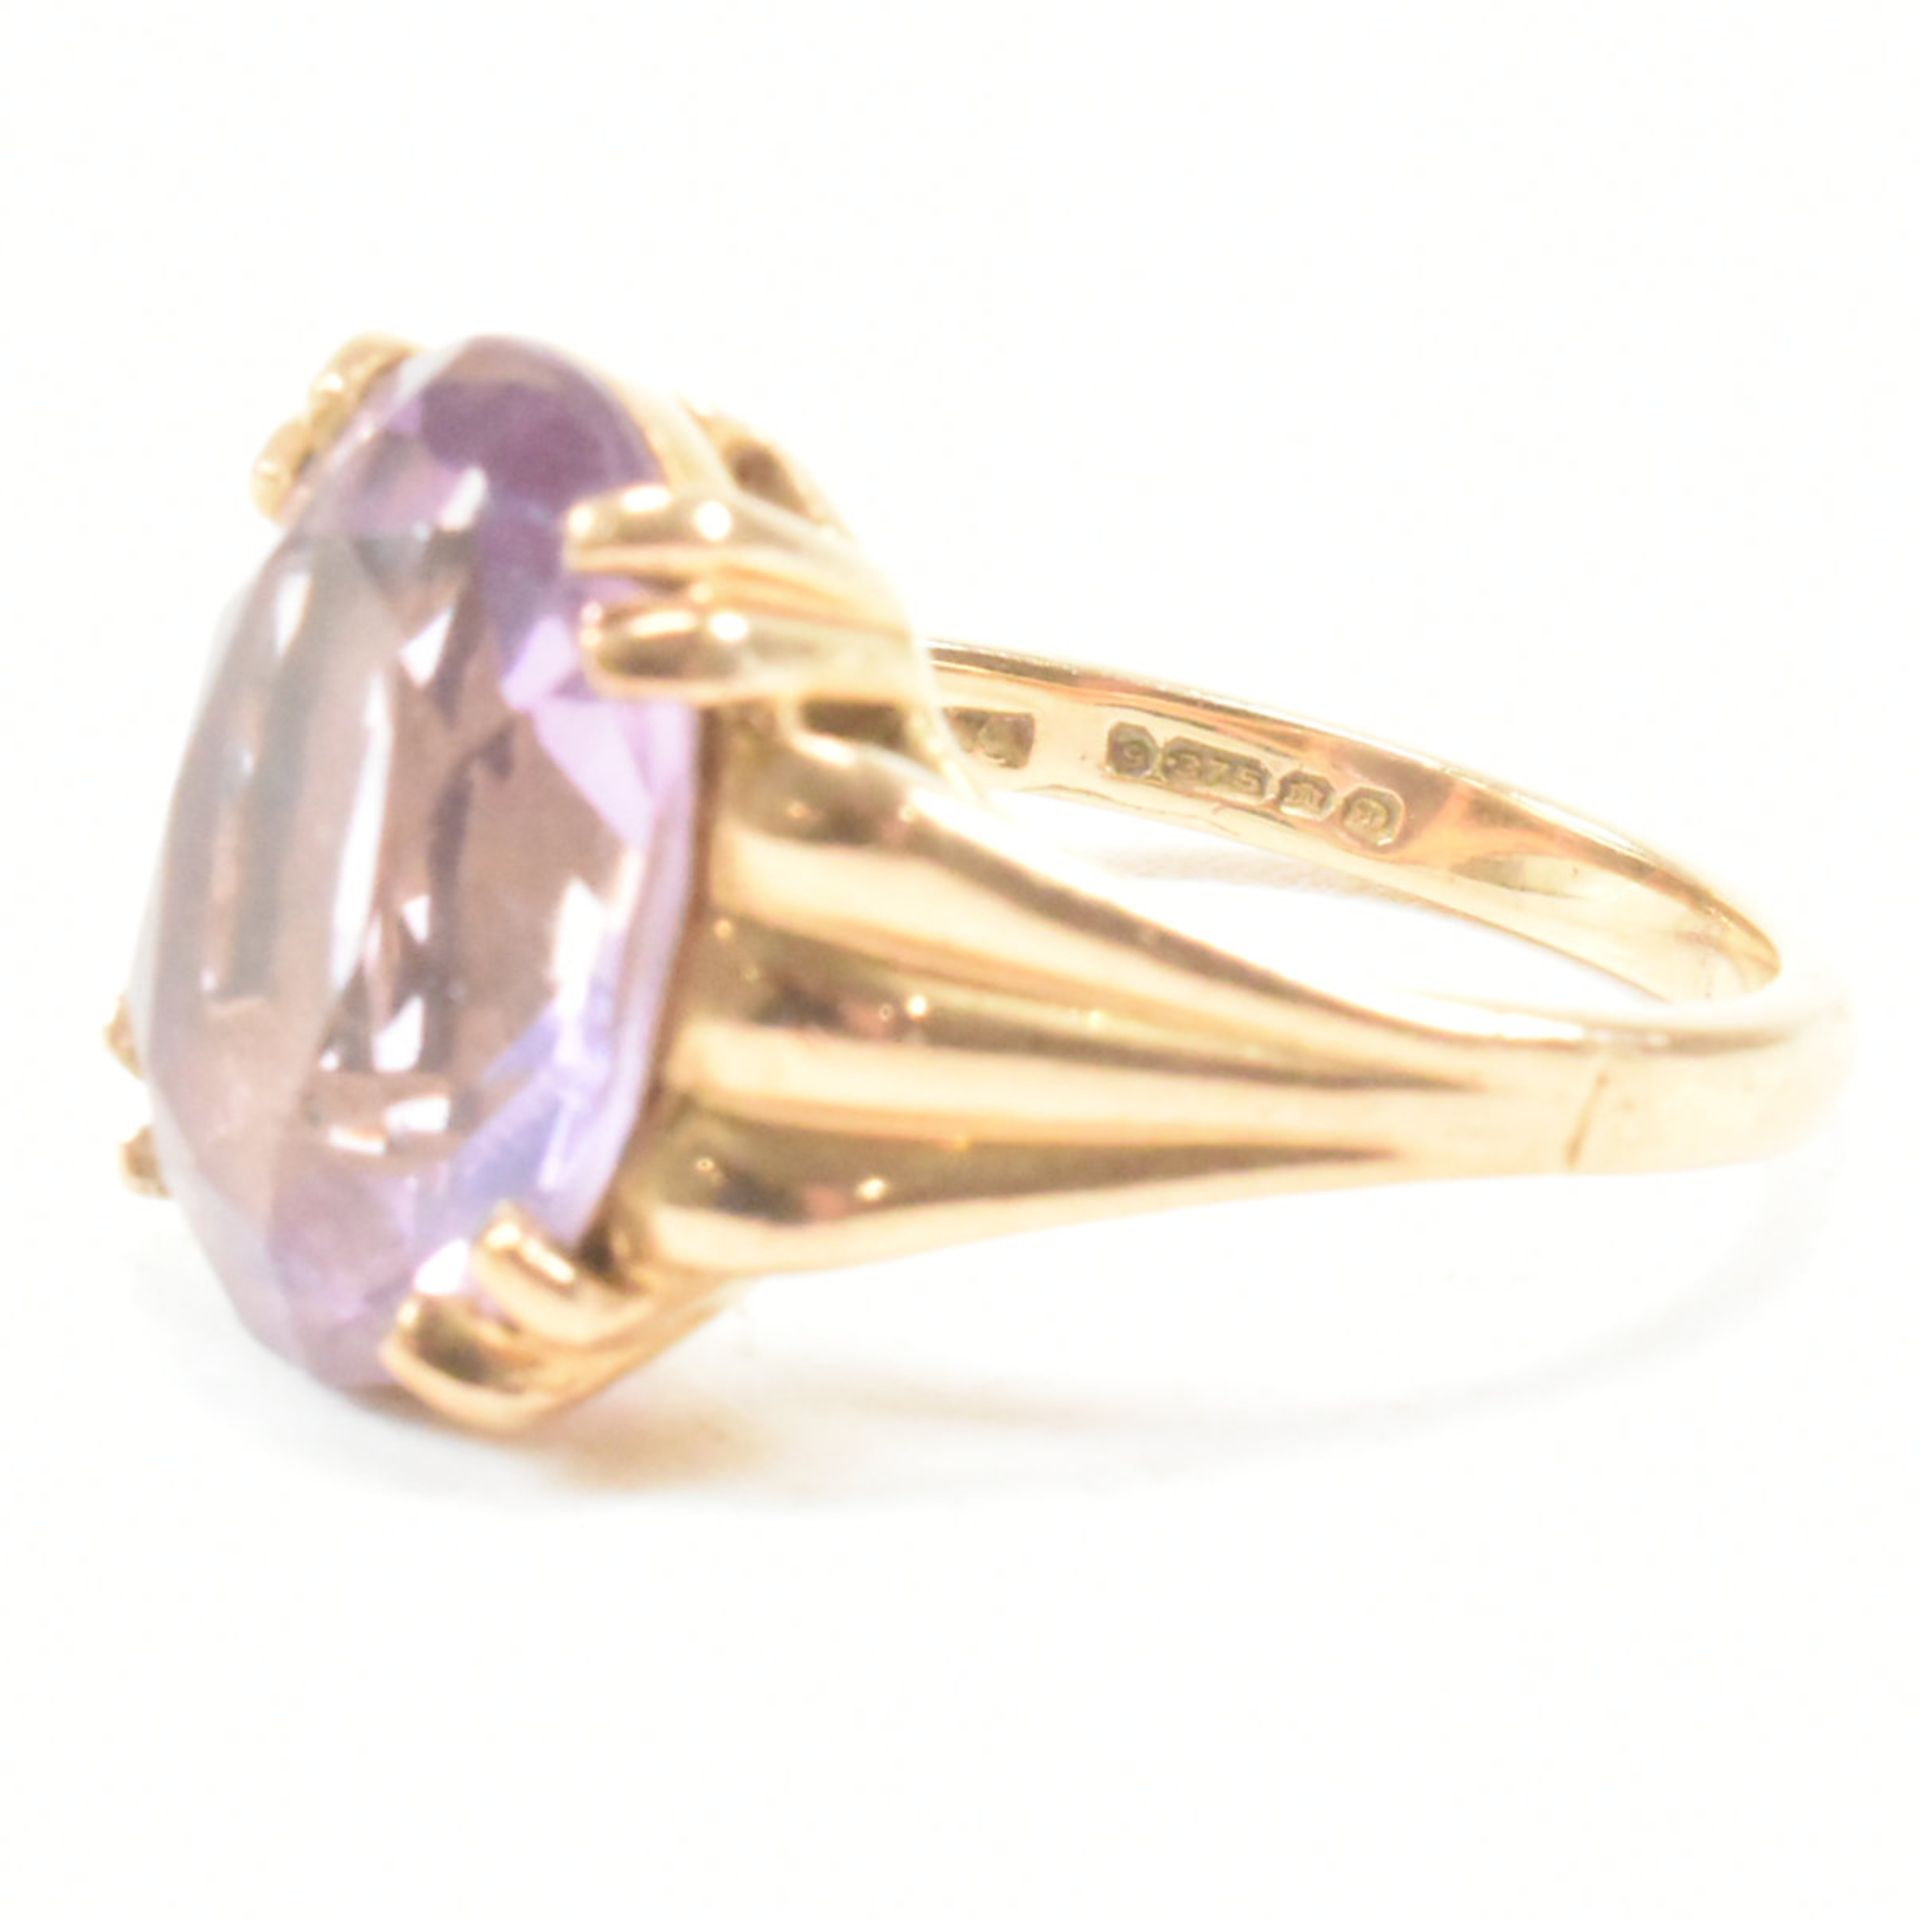 VINTAGE HALLMARKED 9CT GOLD & AMETHYST SOLITAIRE RING - Image 7 of 9